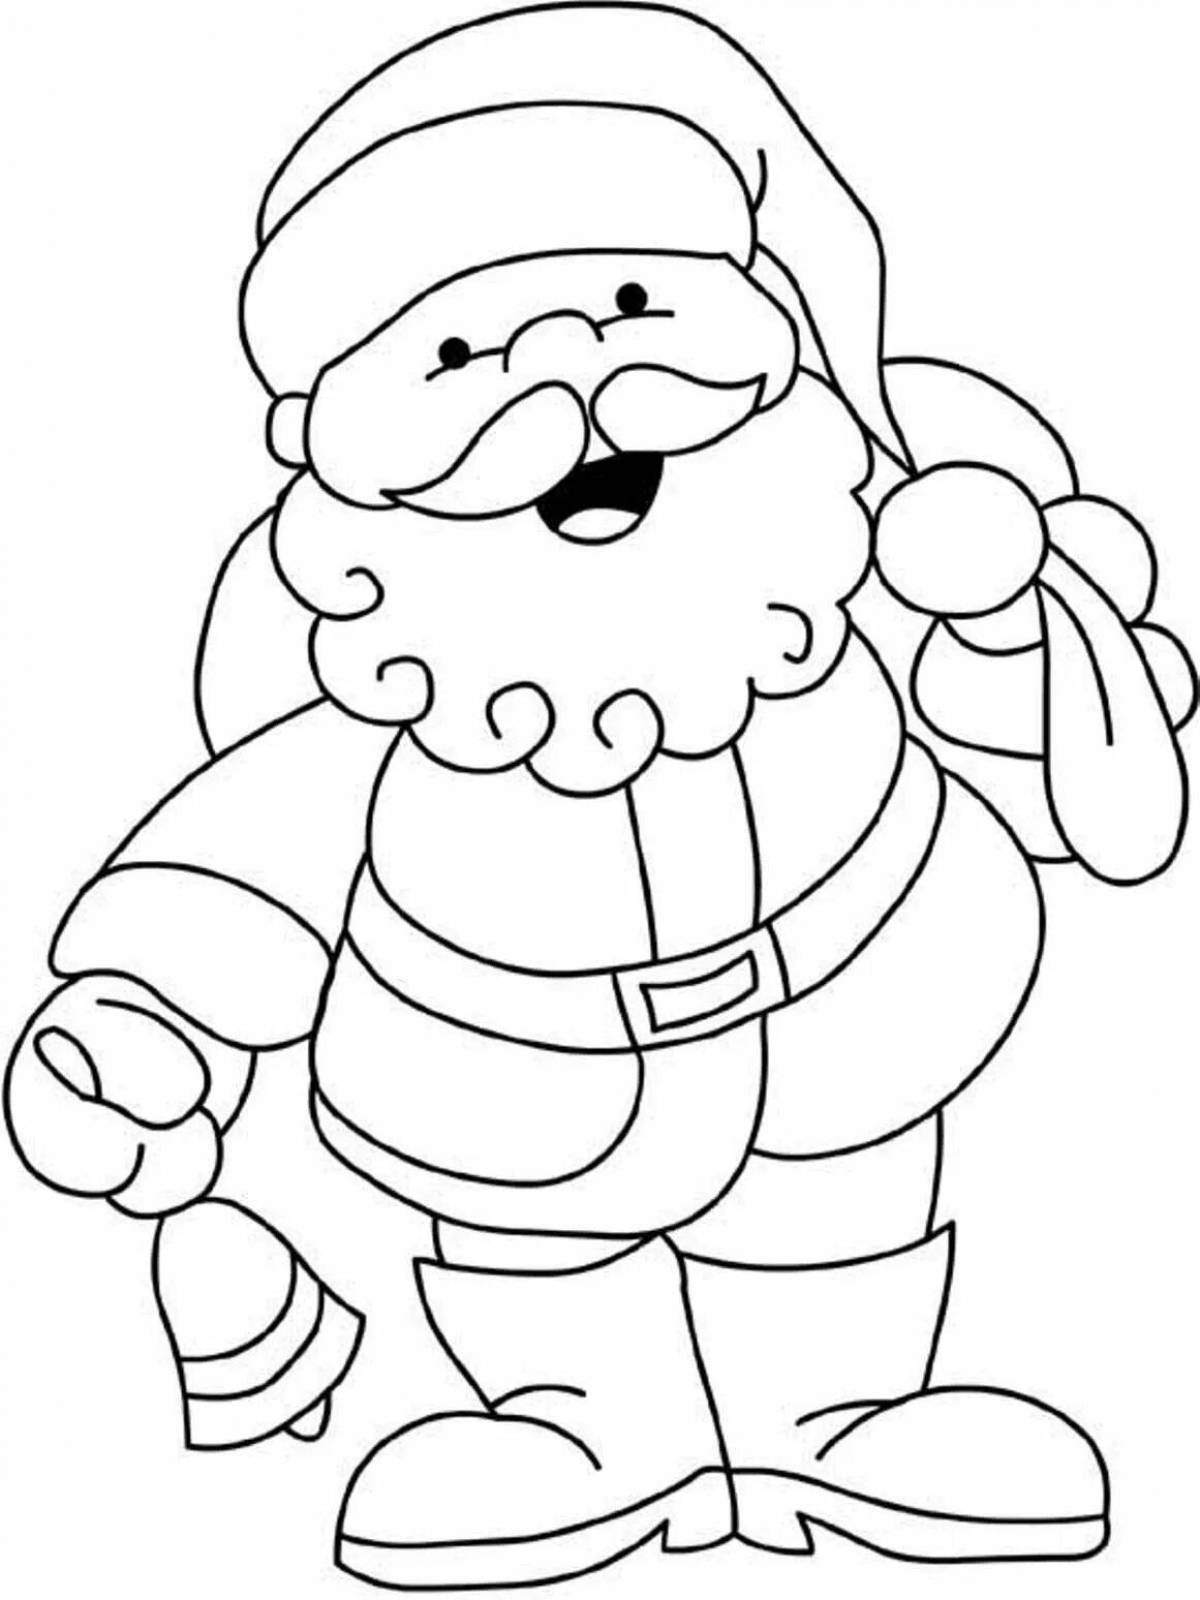 Attractive Santa Claus coloring book for 2-3 year olds